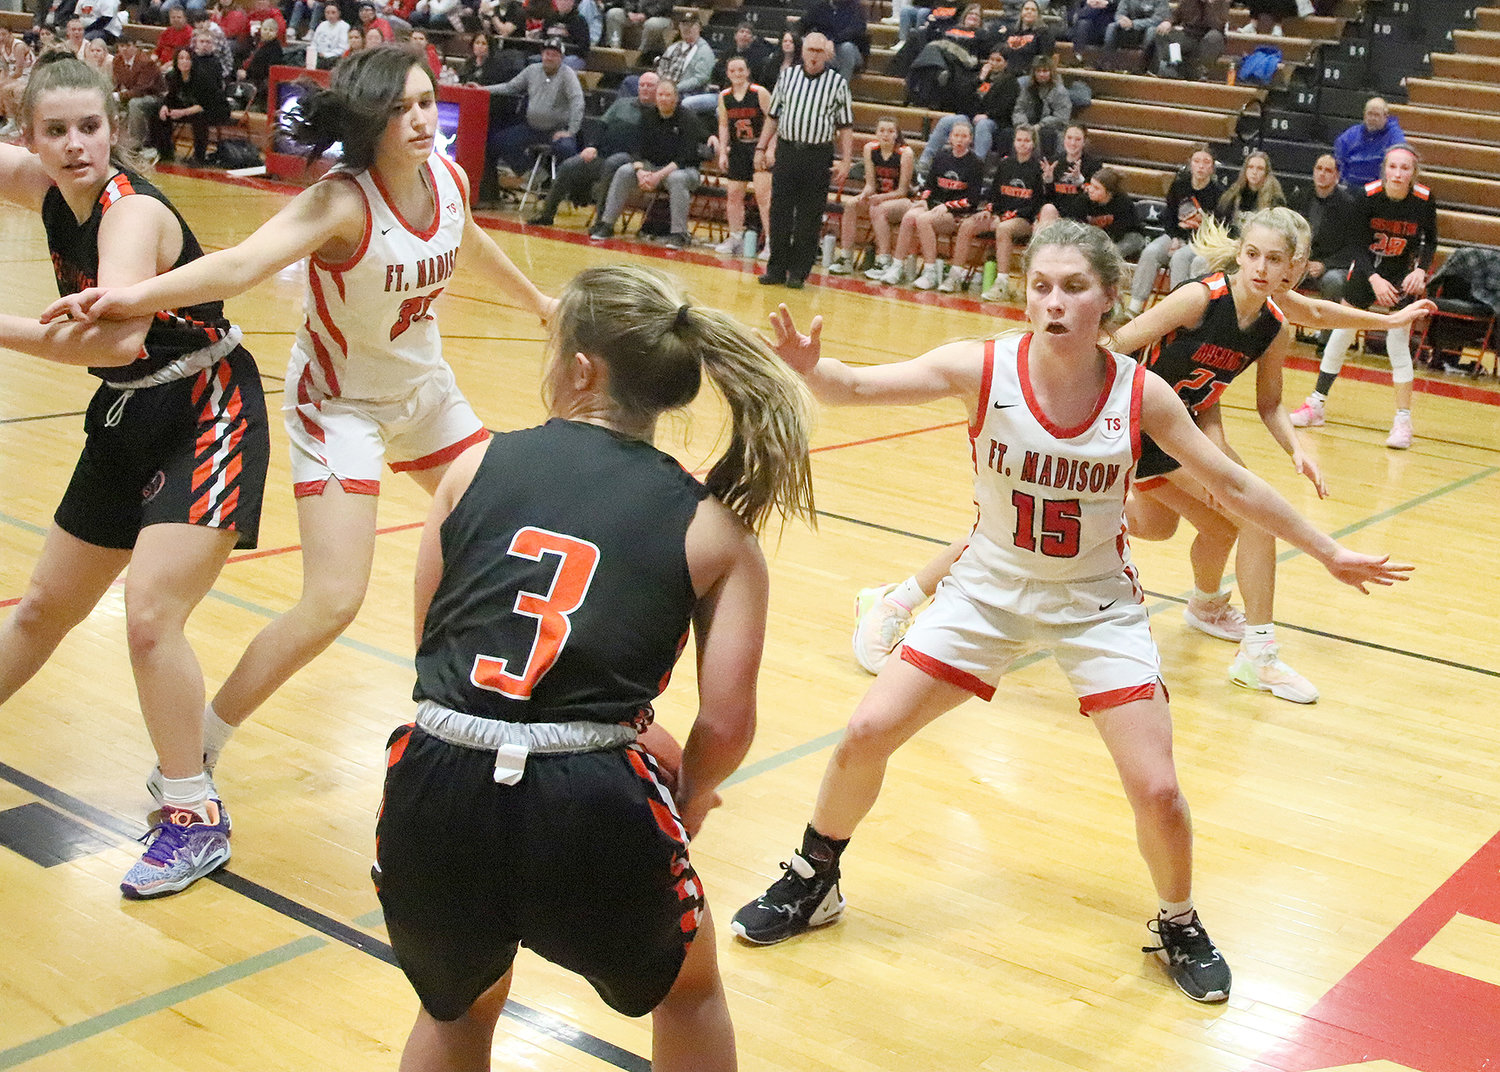 The Lady Hounds Irelynd Sargent (15) cuts off Washington's Makenna Conrad at the baseline in the 4th quarter of Tuesday's game at Fort Madison